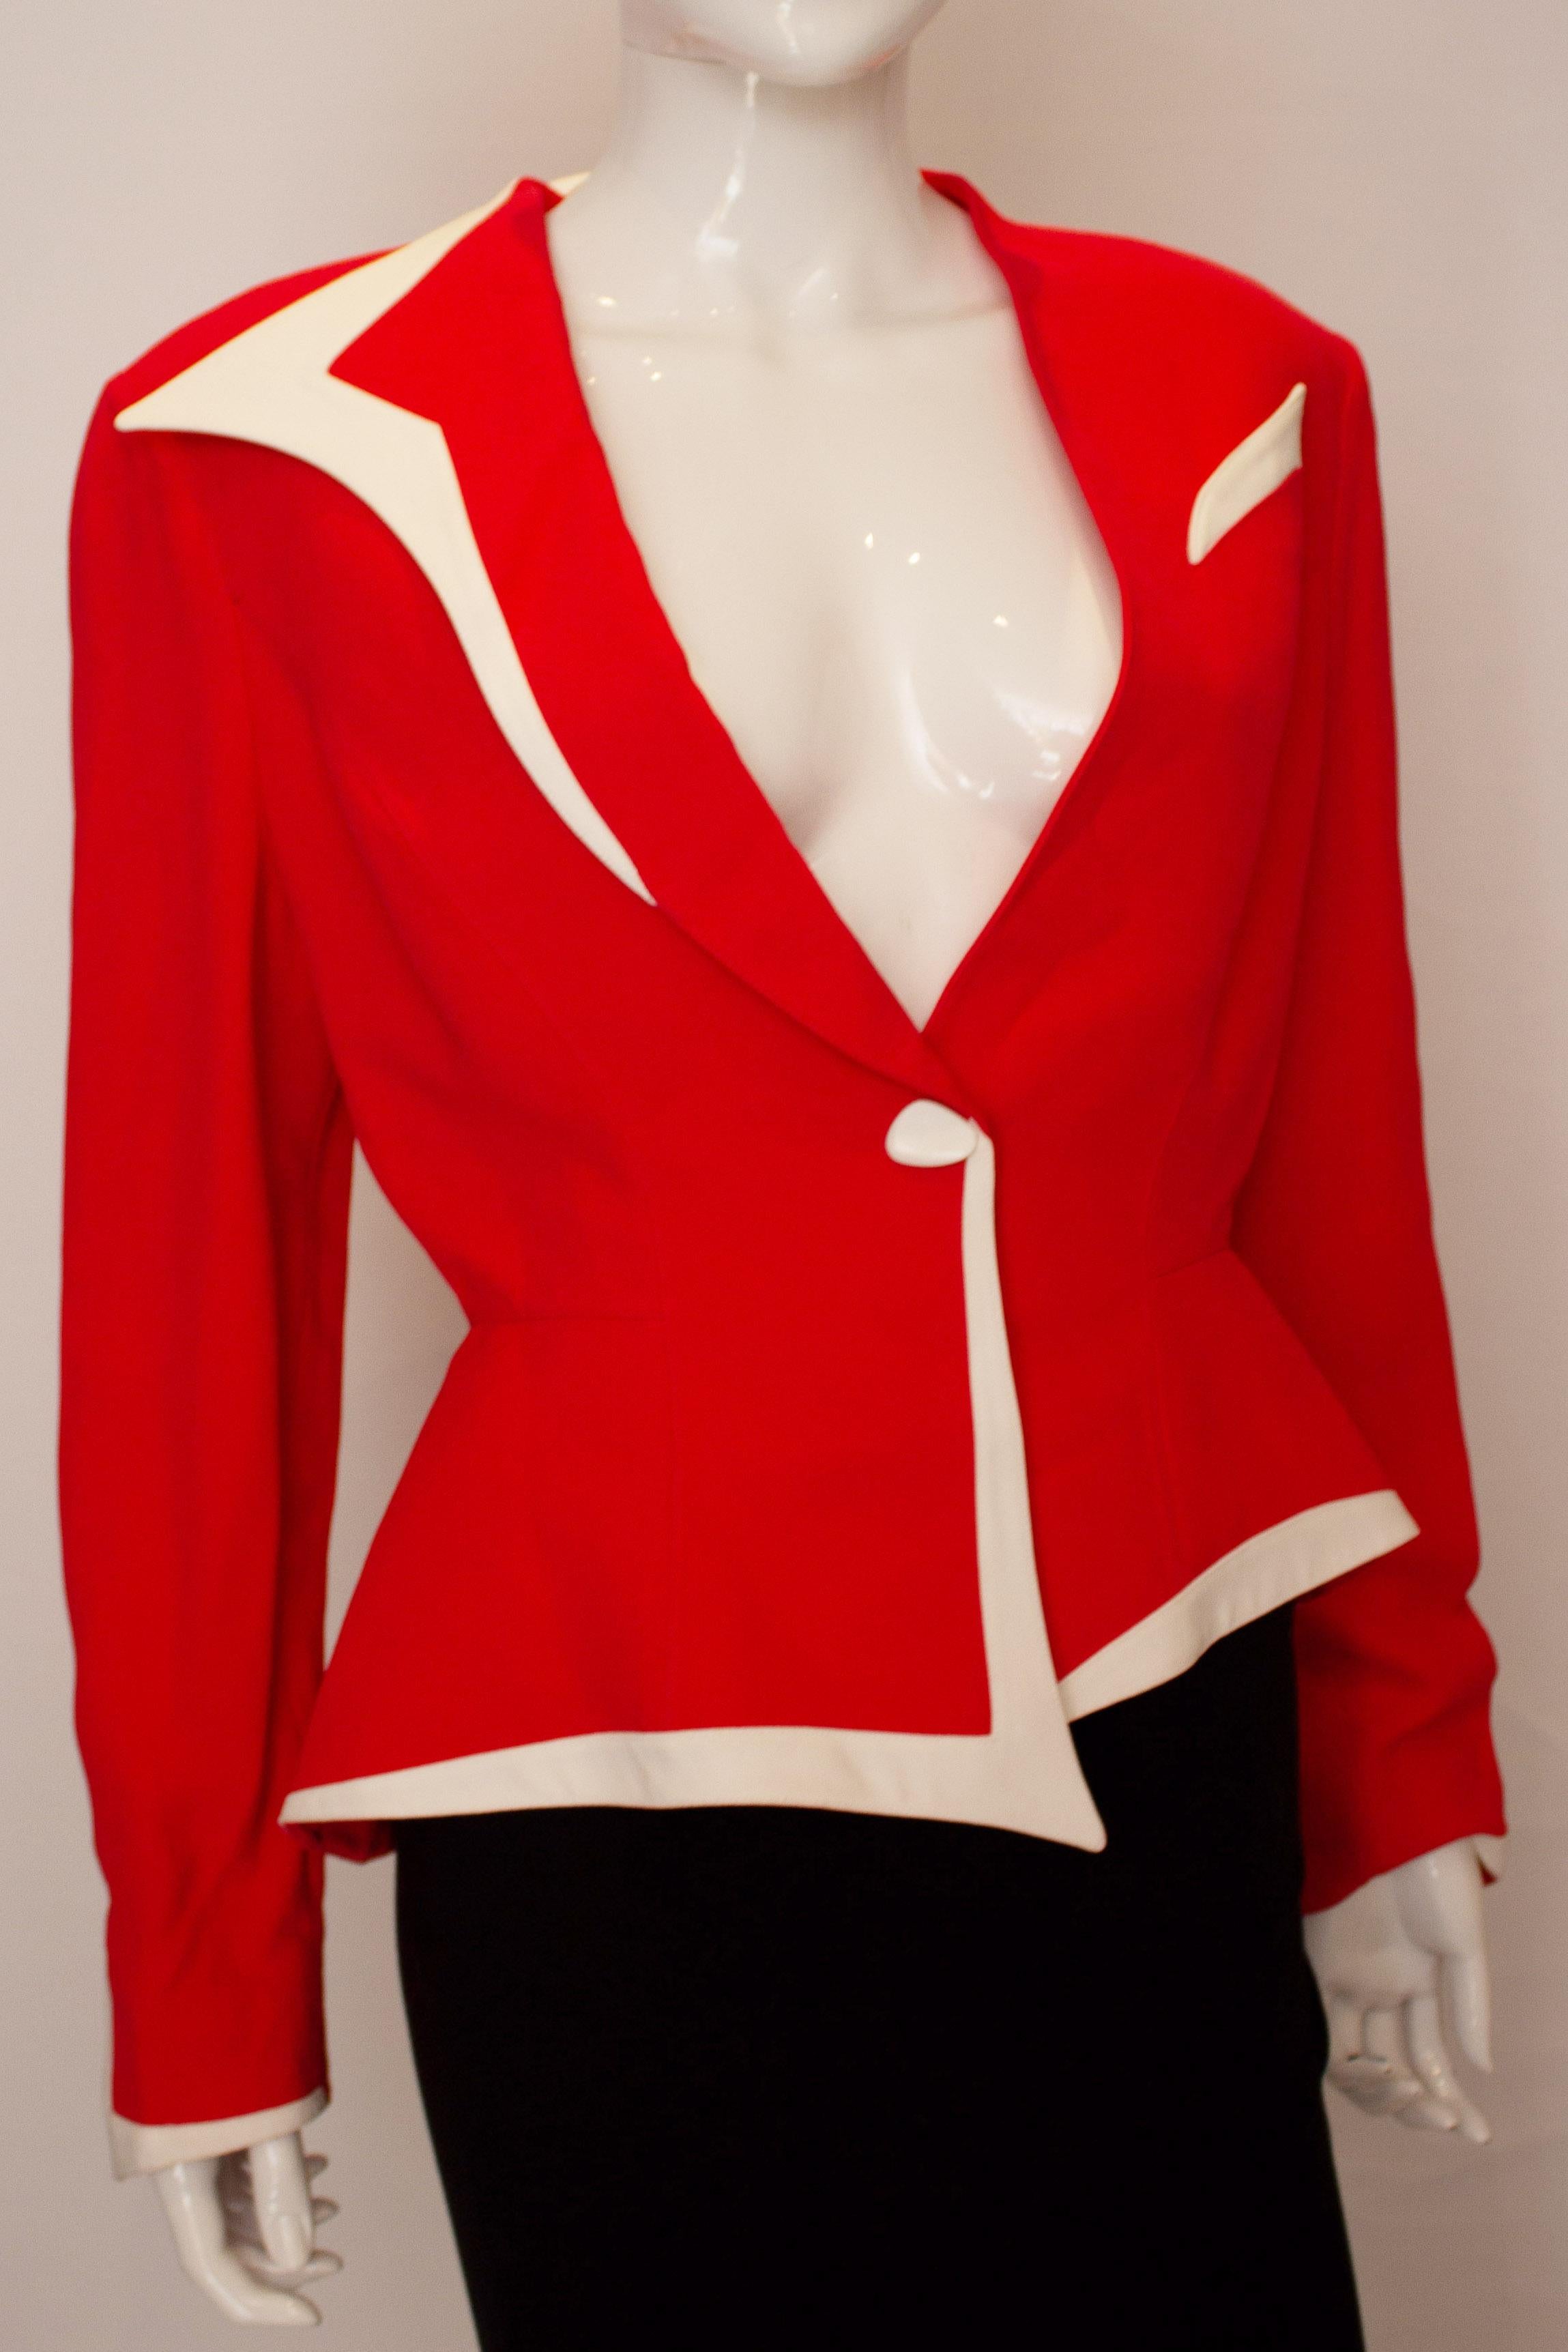 A chic vintage jacket by Thierry Mugler. The jacket is red with white trim on the cuffs and hem. It has an open neckline and will fit a bust up top 40''.